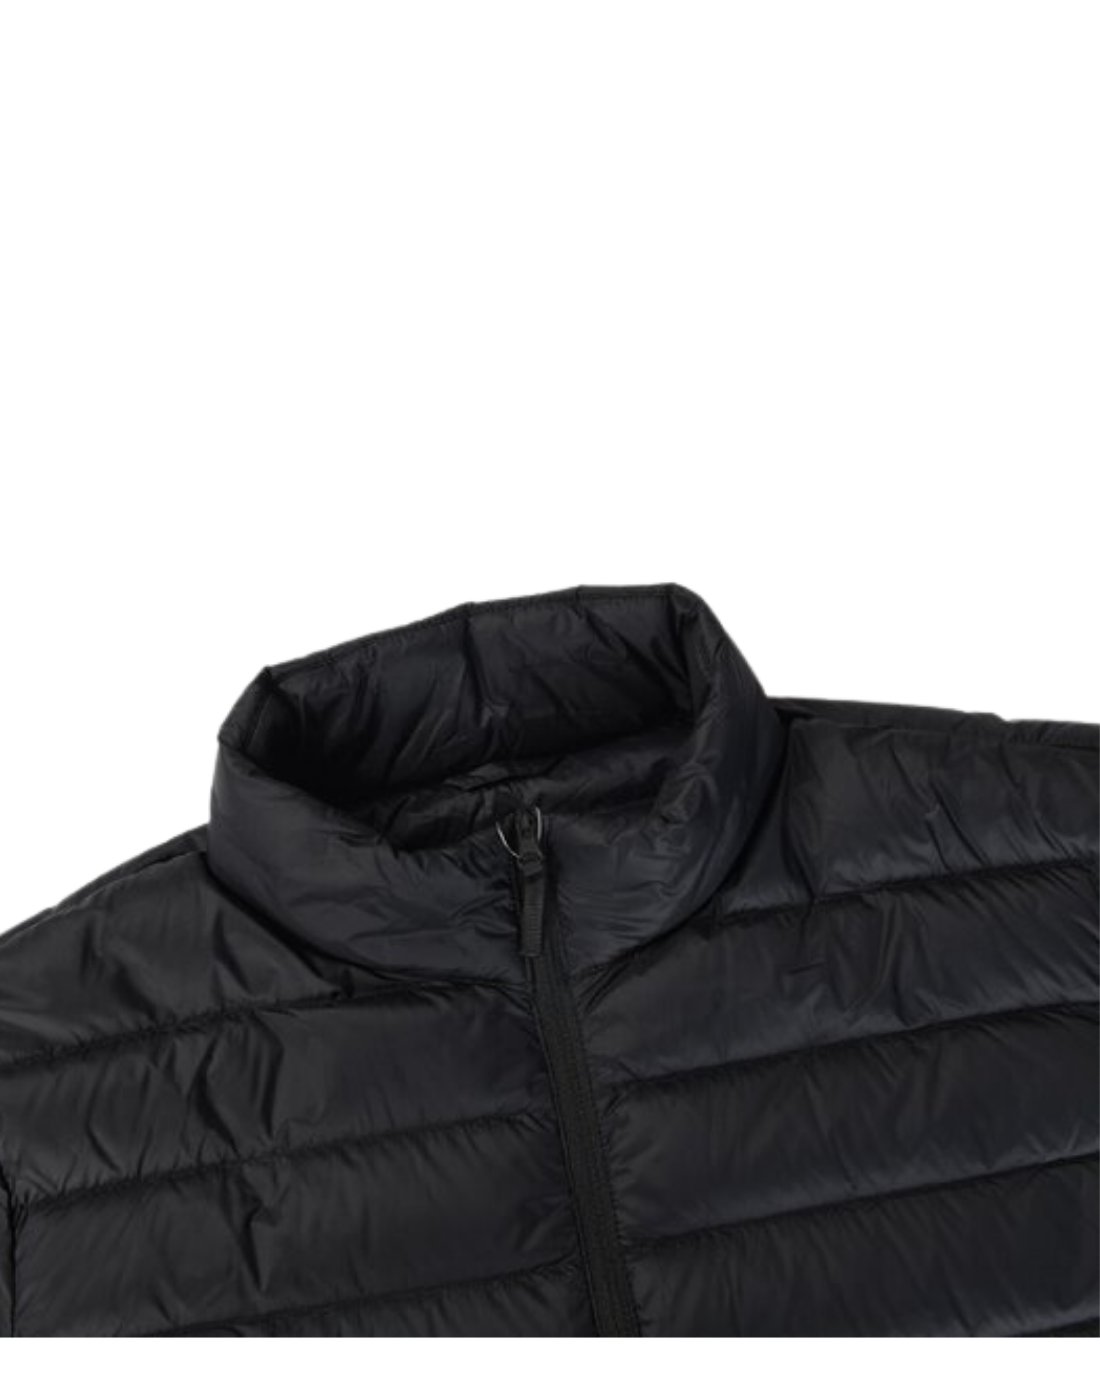 90-10 Air Down Jacket 09 Signature Black - Giordano South Africa